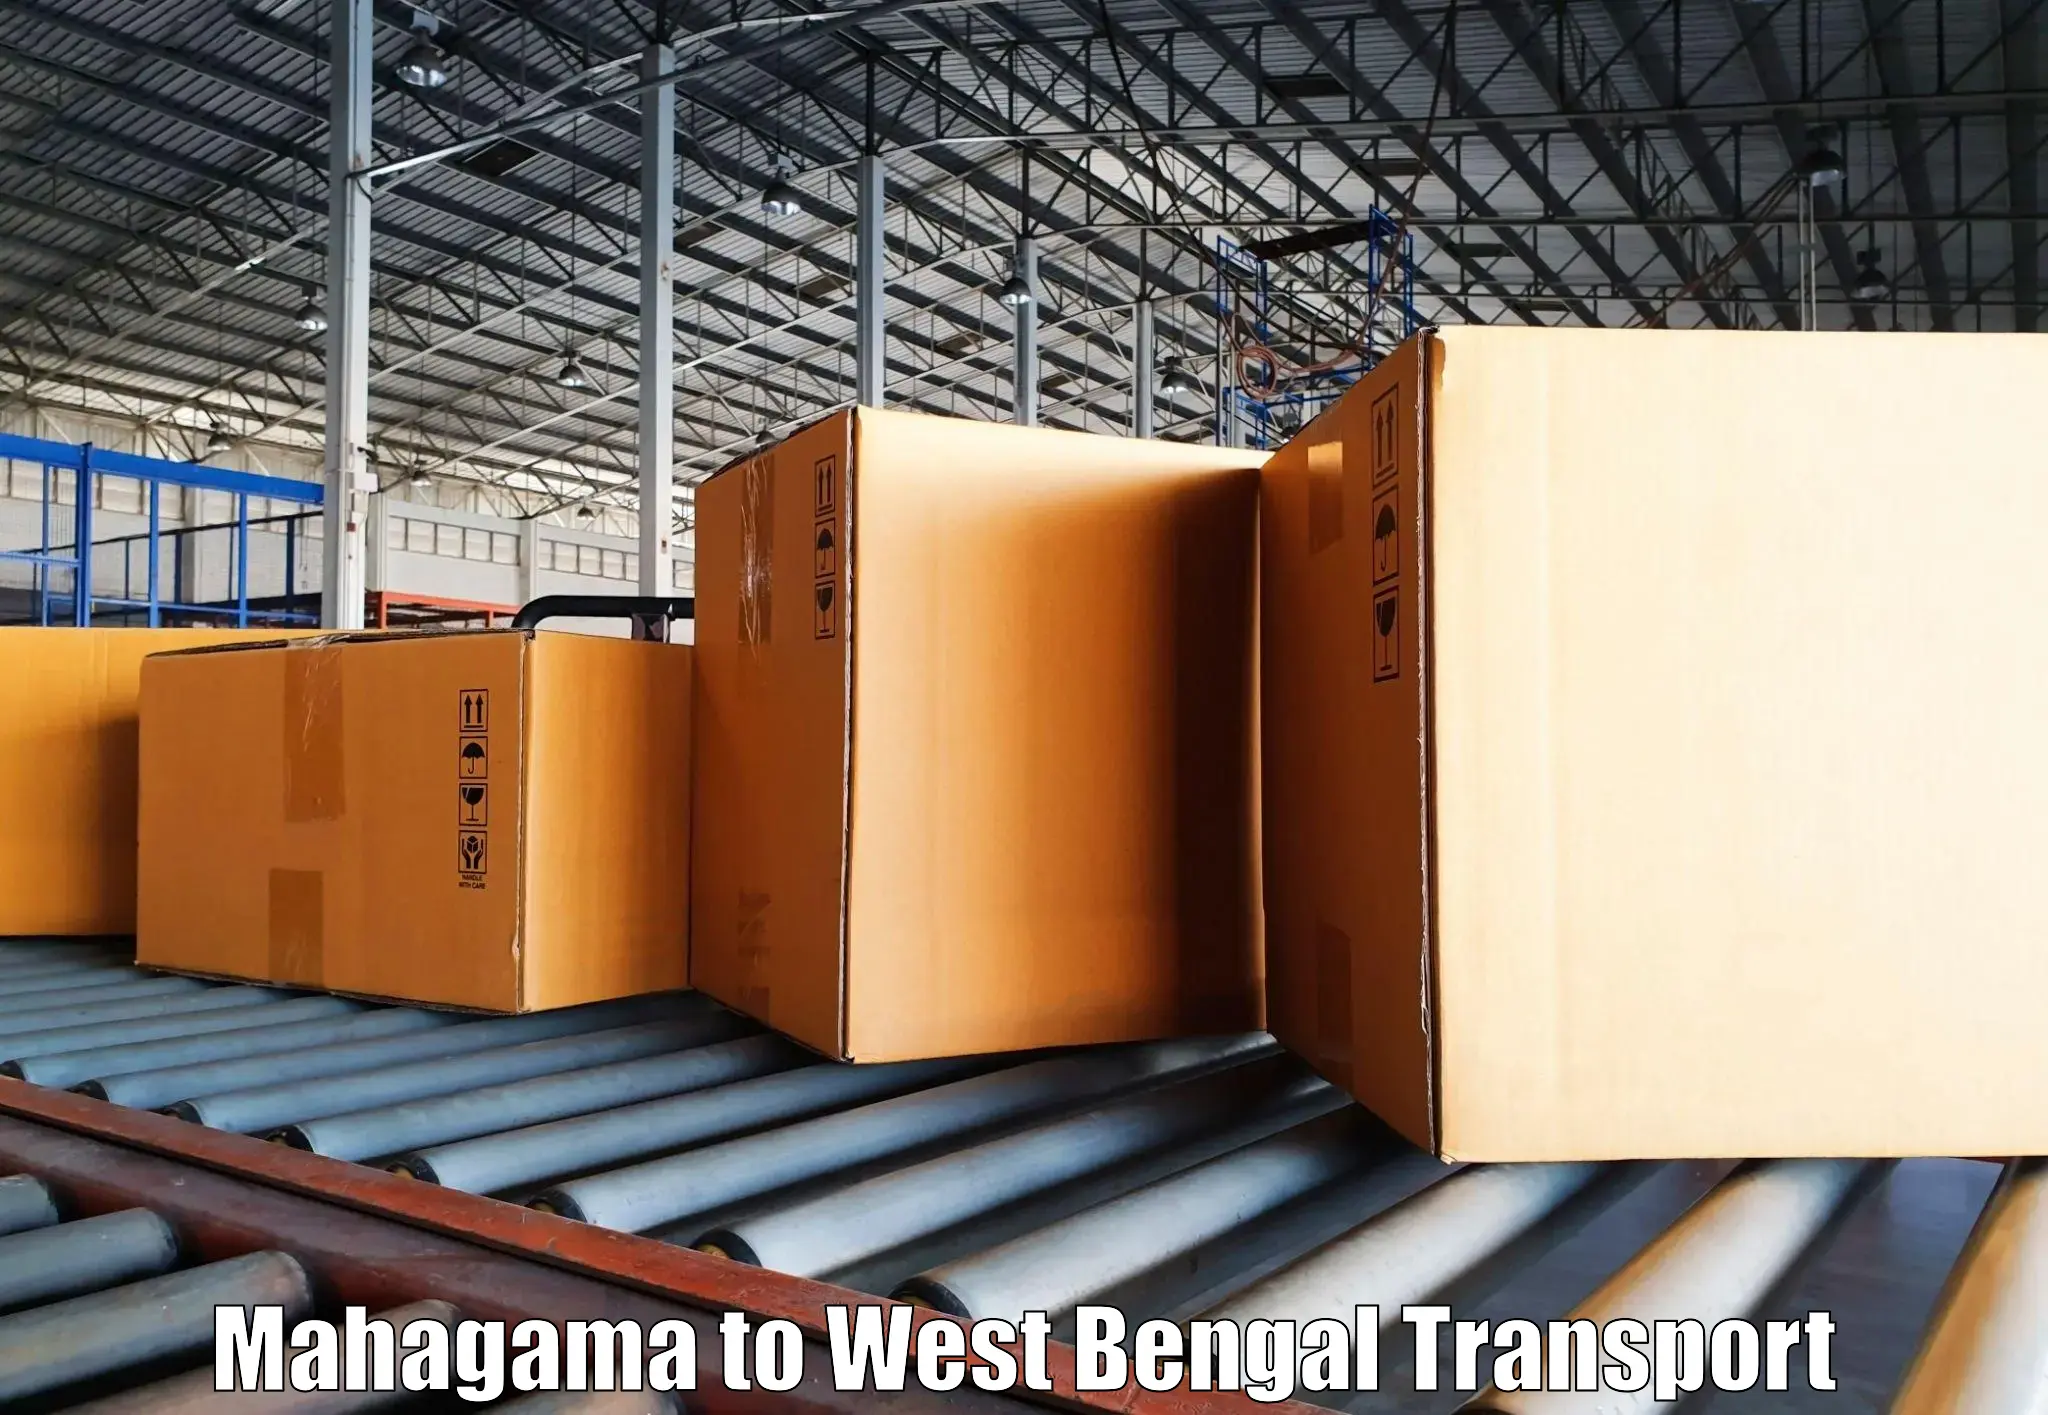 Online transport service Mahagama to West Bengal